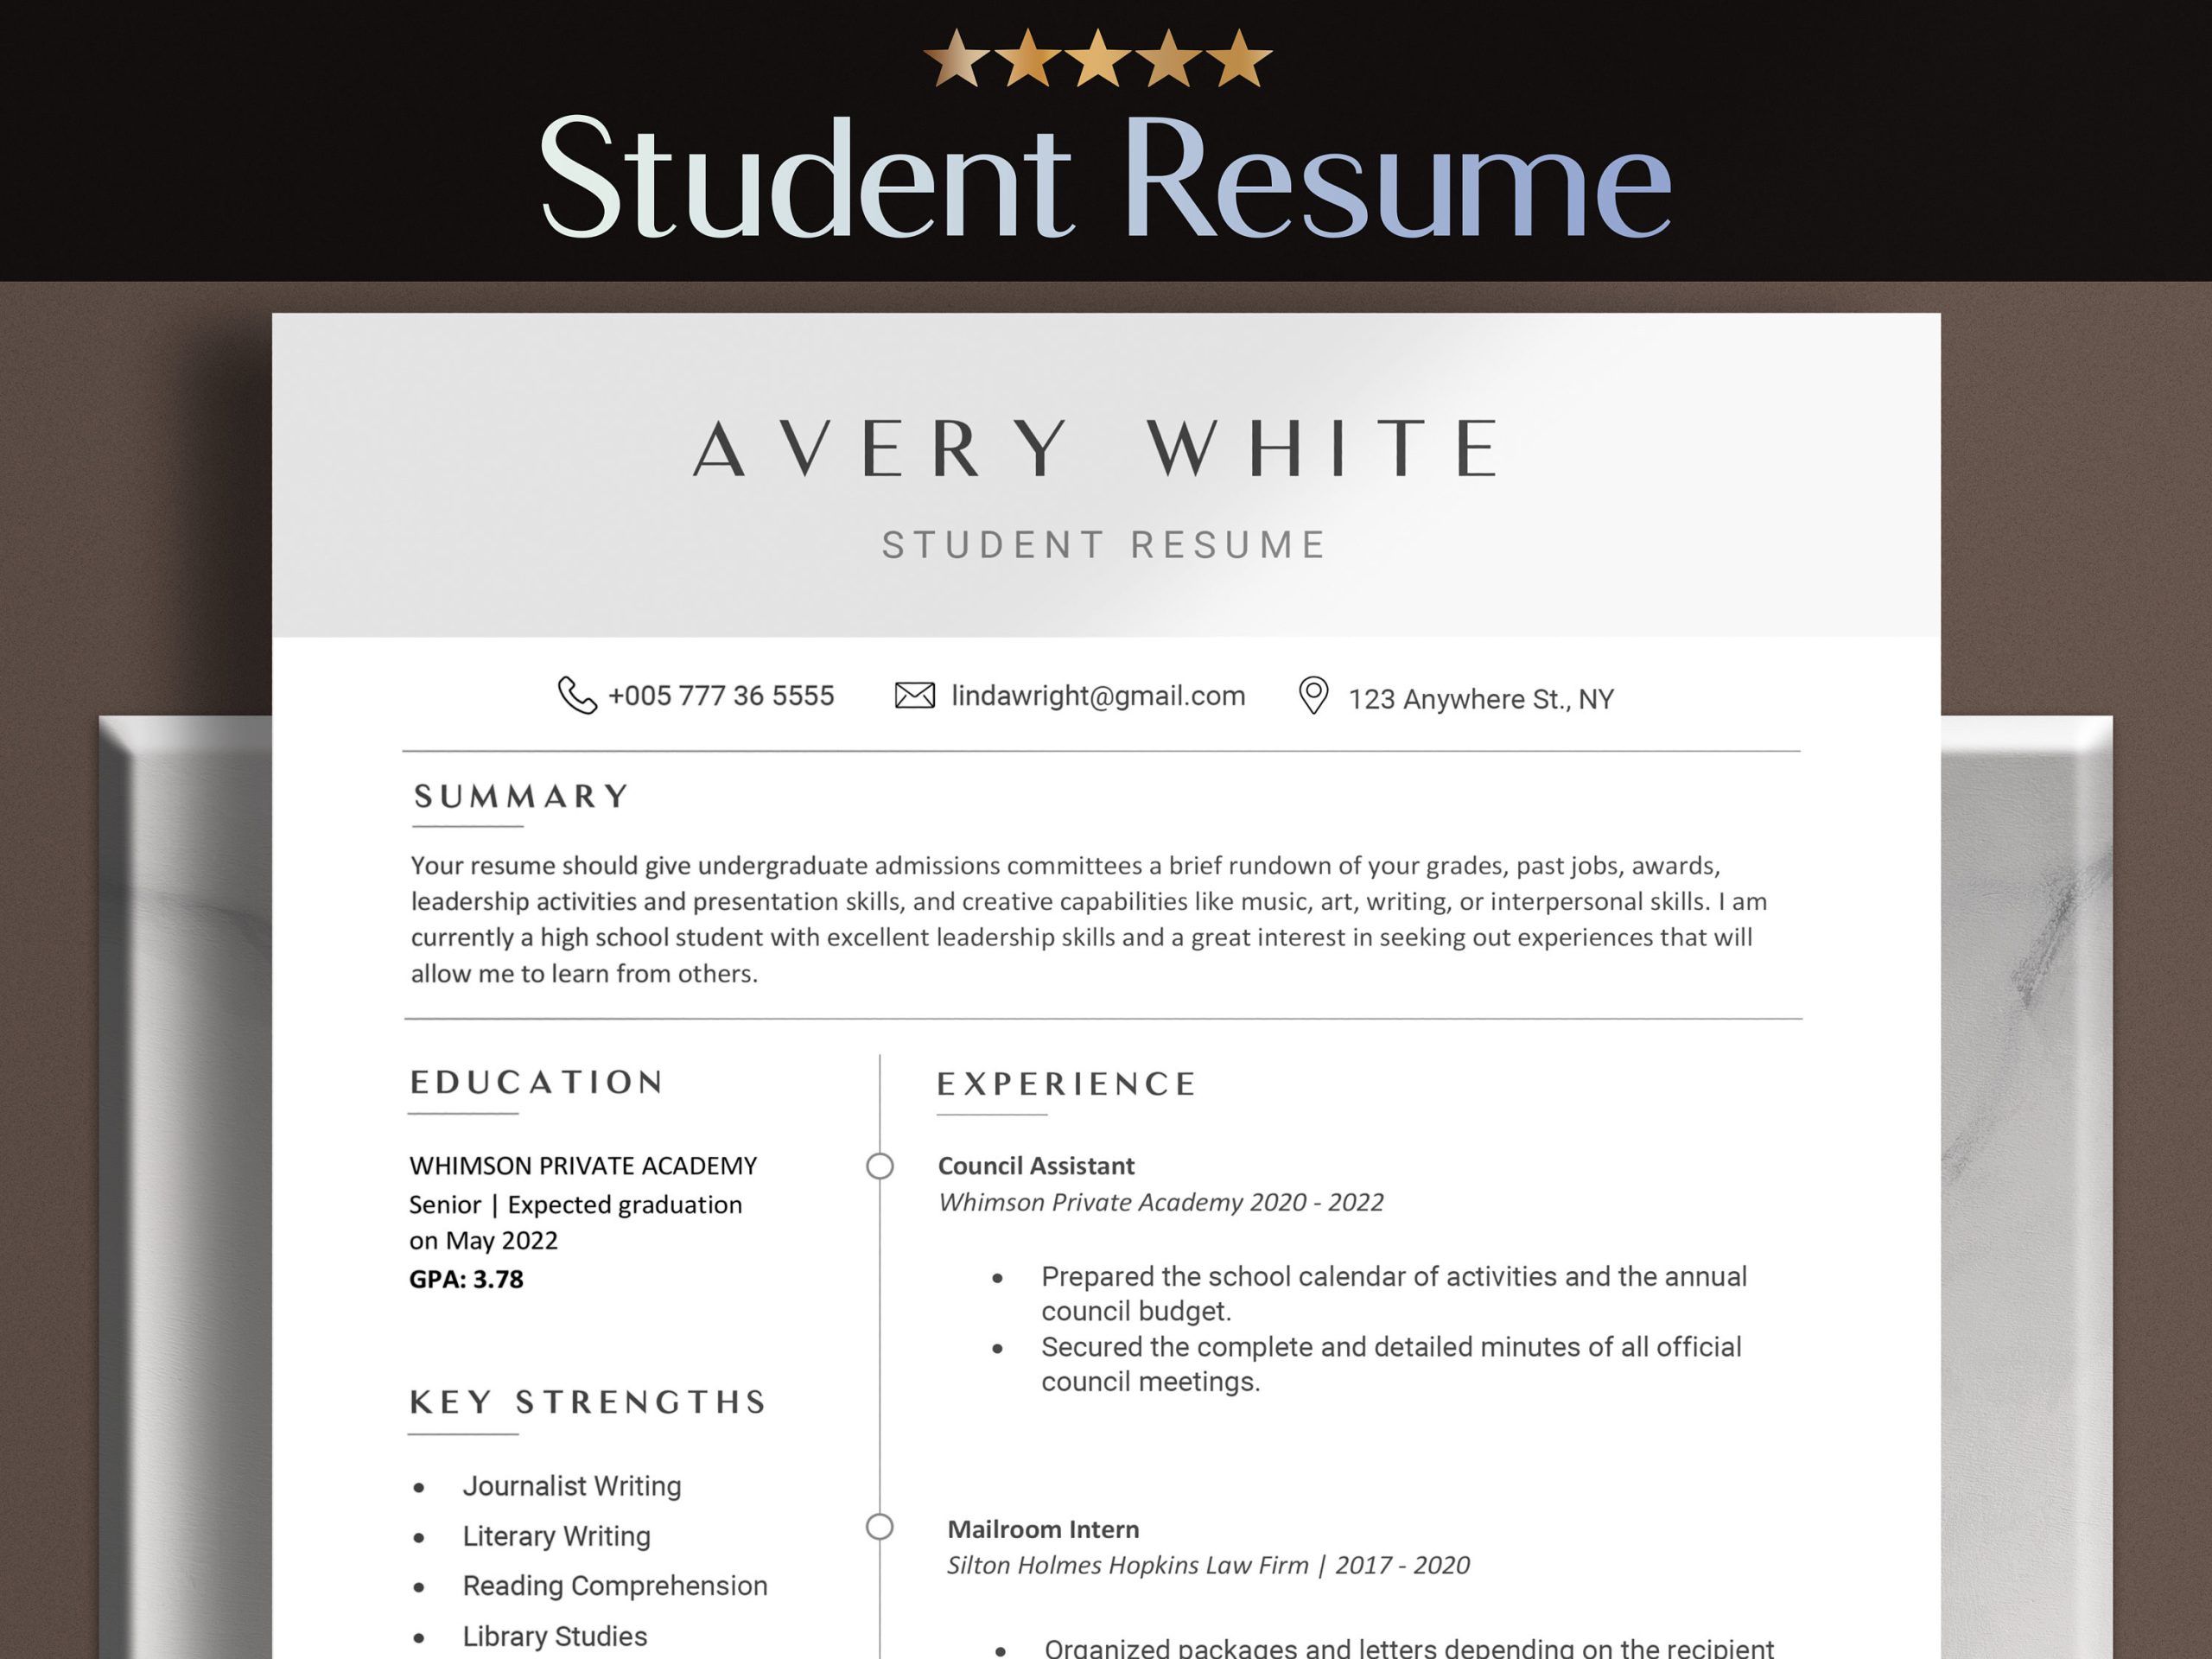 Sample Resume for Highschool Student with No Work Experience High School Student Resume with No Work Experience Template – Etsy